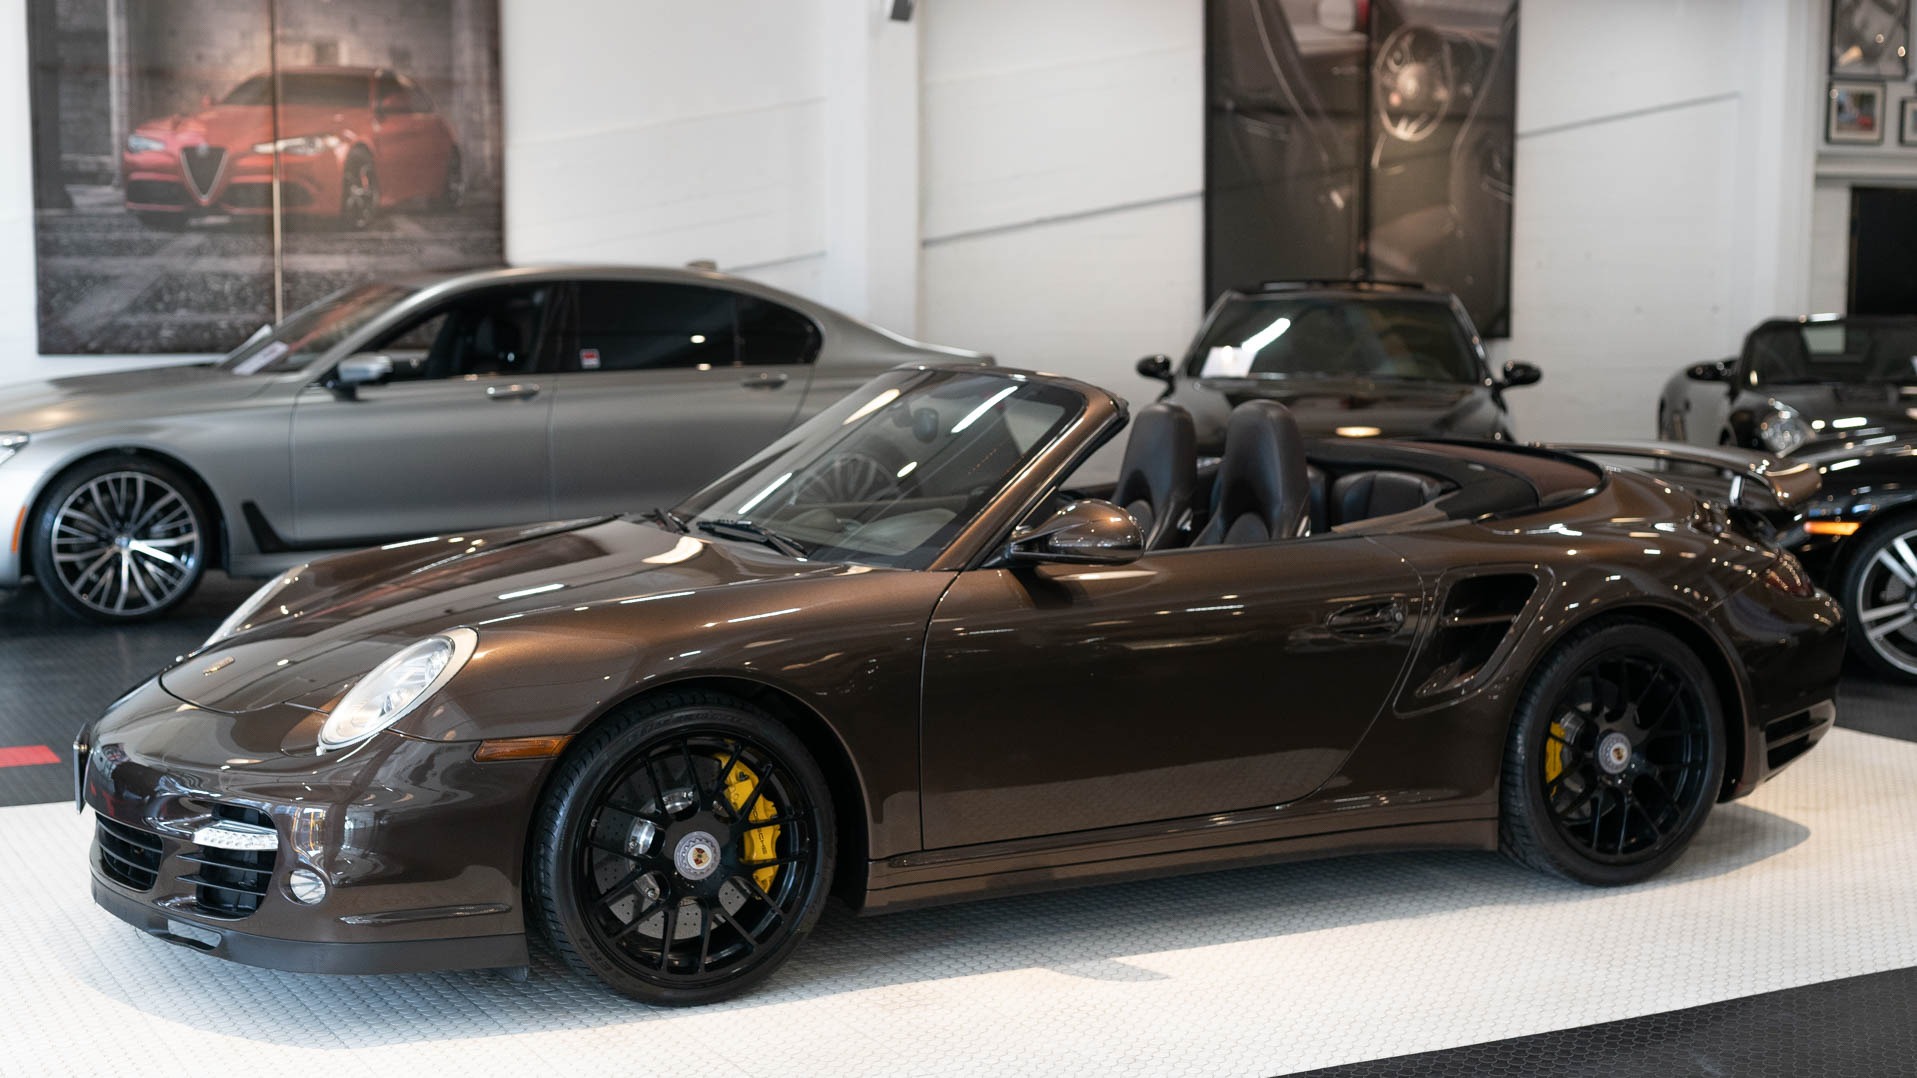 Used 2013 Porsche 911 Turbo S For Sale 91900 Cars